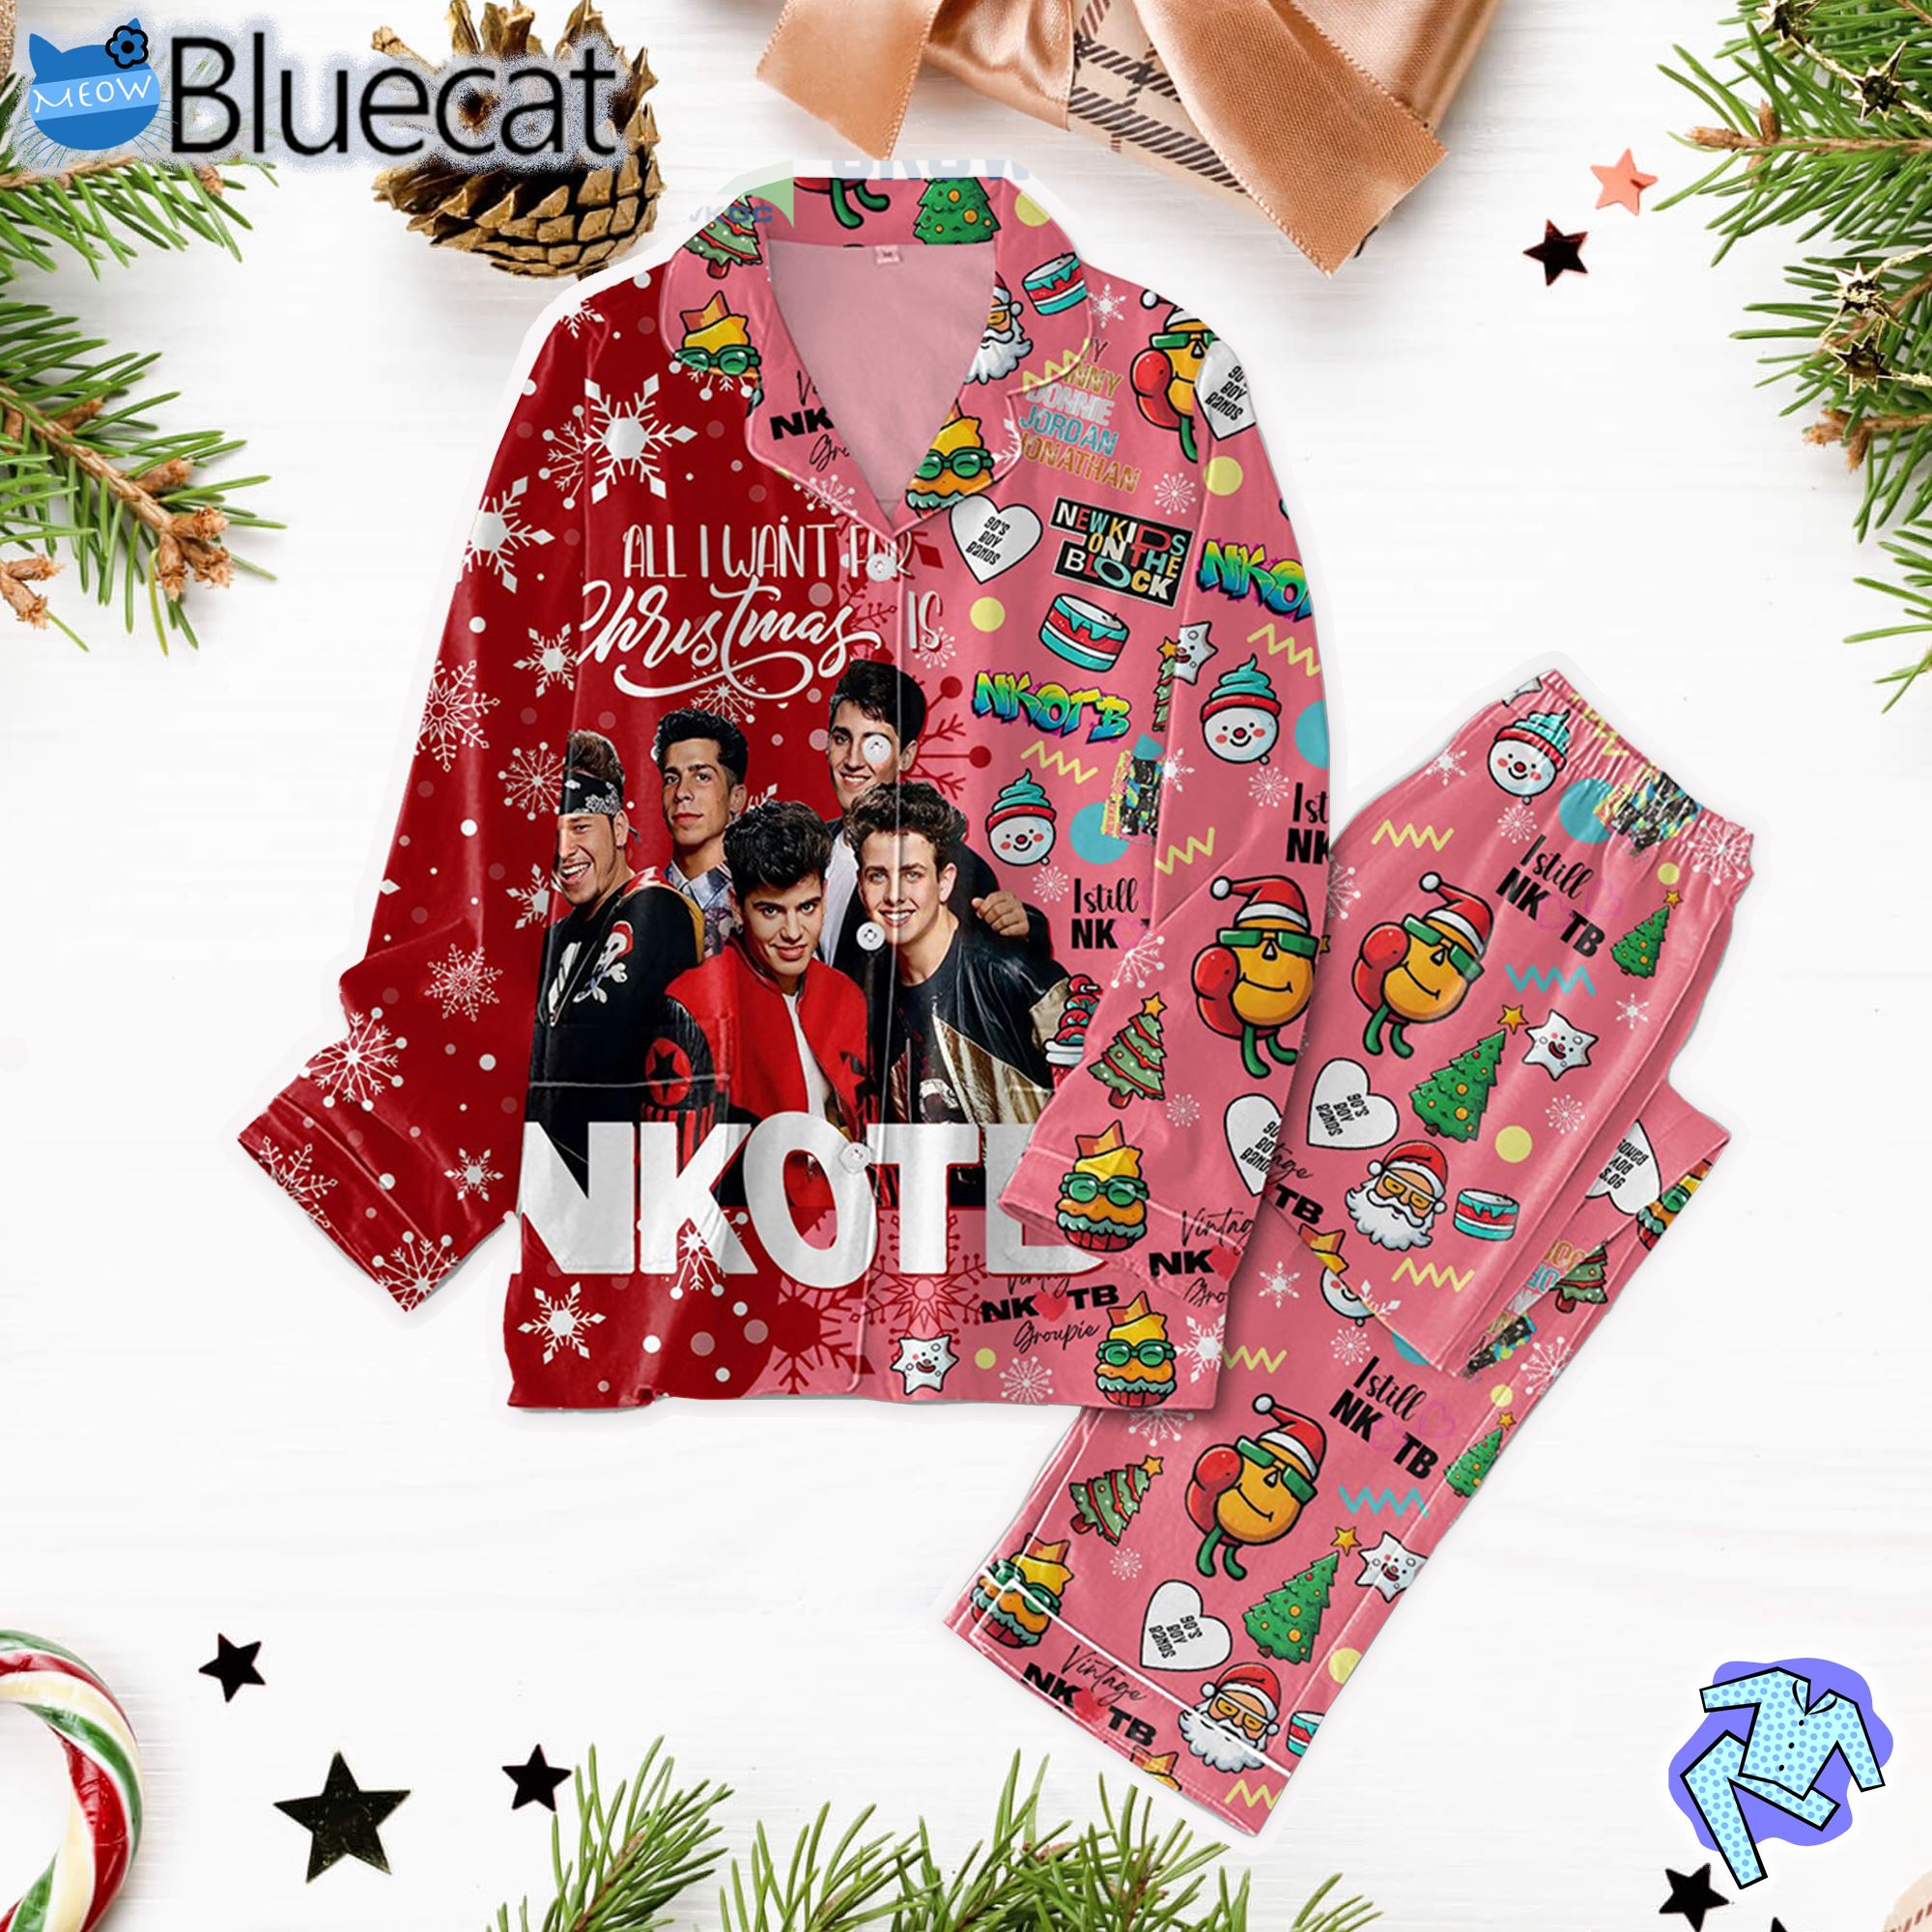 Nkotb All I Want For Christmas Is New Kids On The Block Pajamas Set 